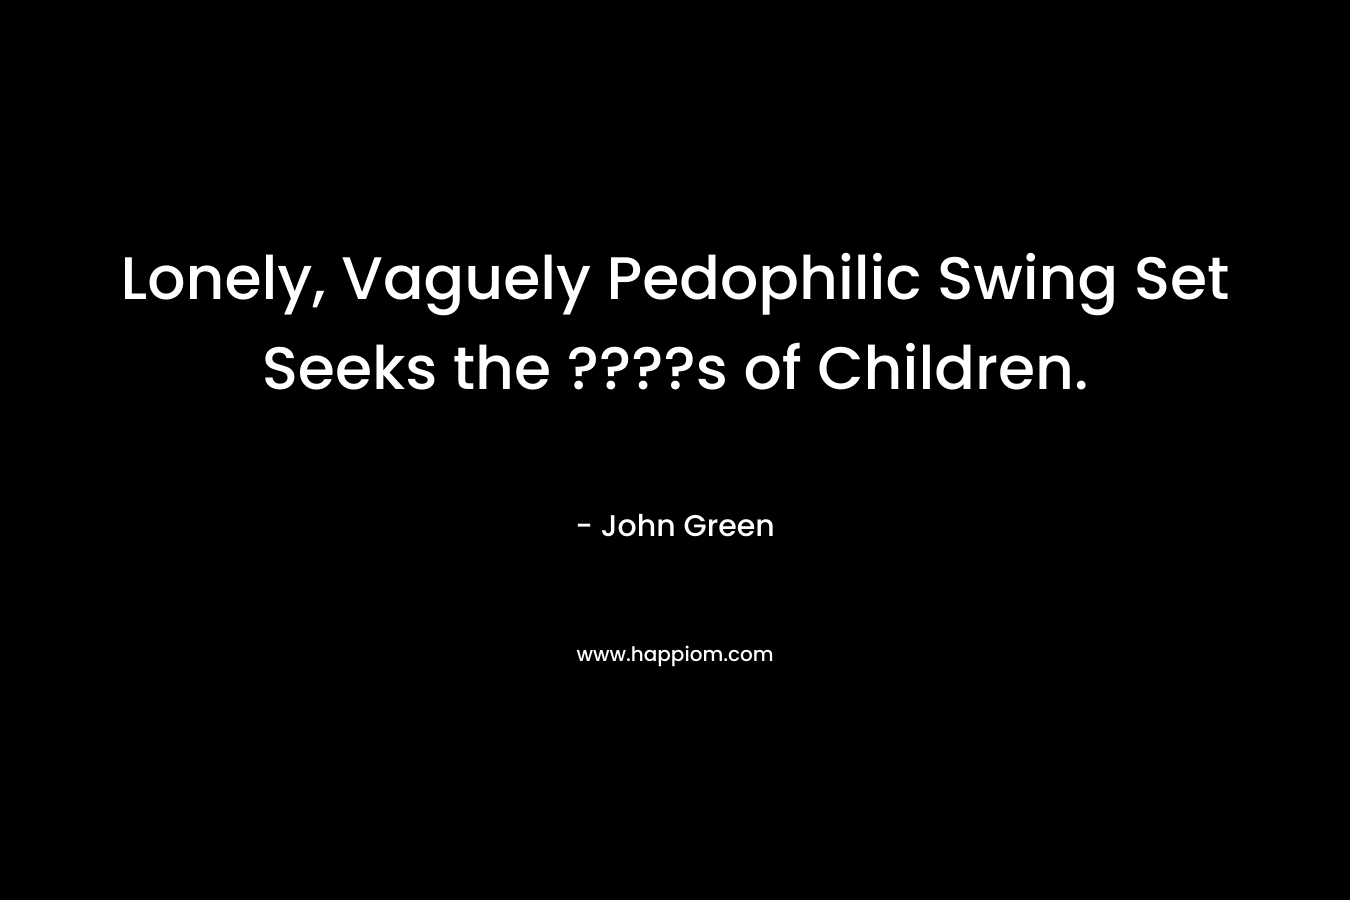 Lonely, Vaguely Pedophilic Swing Set Seeks the ????s of Children. – John Green